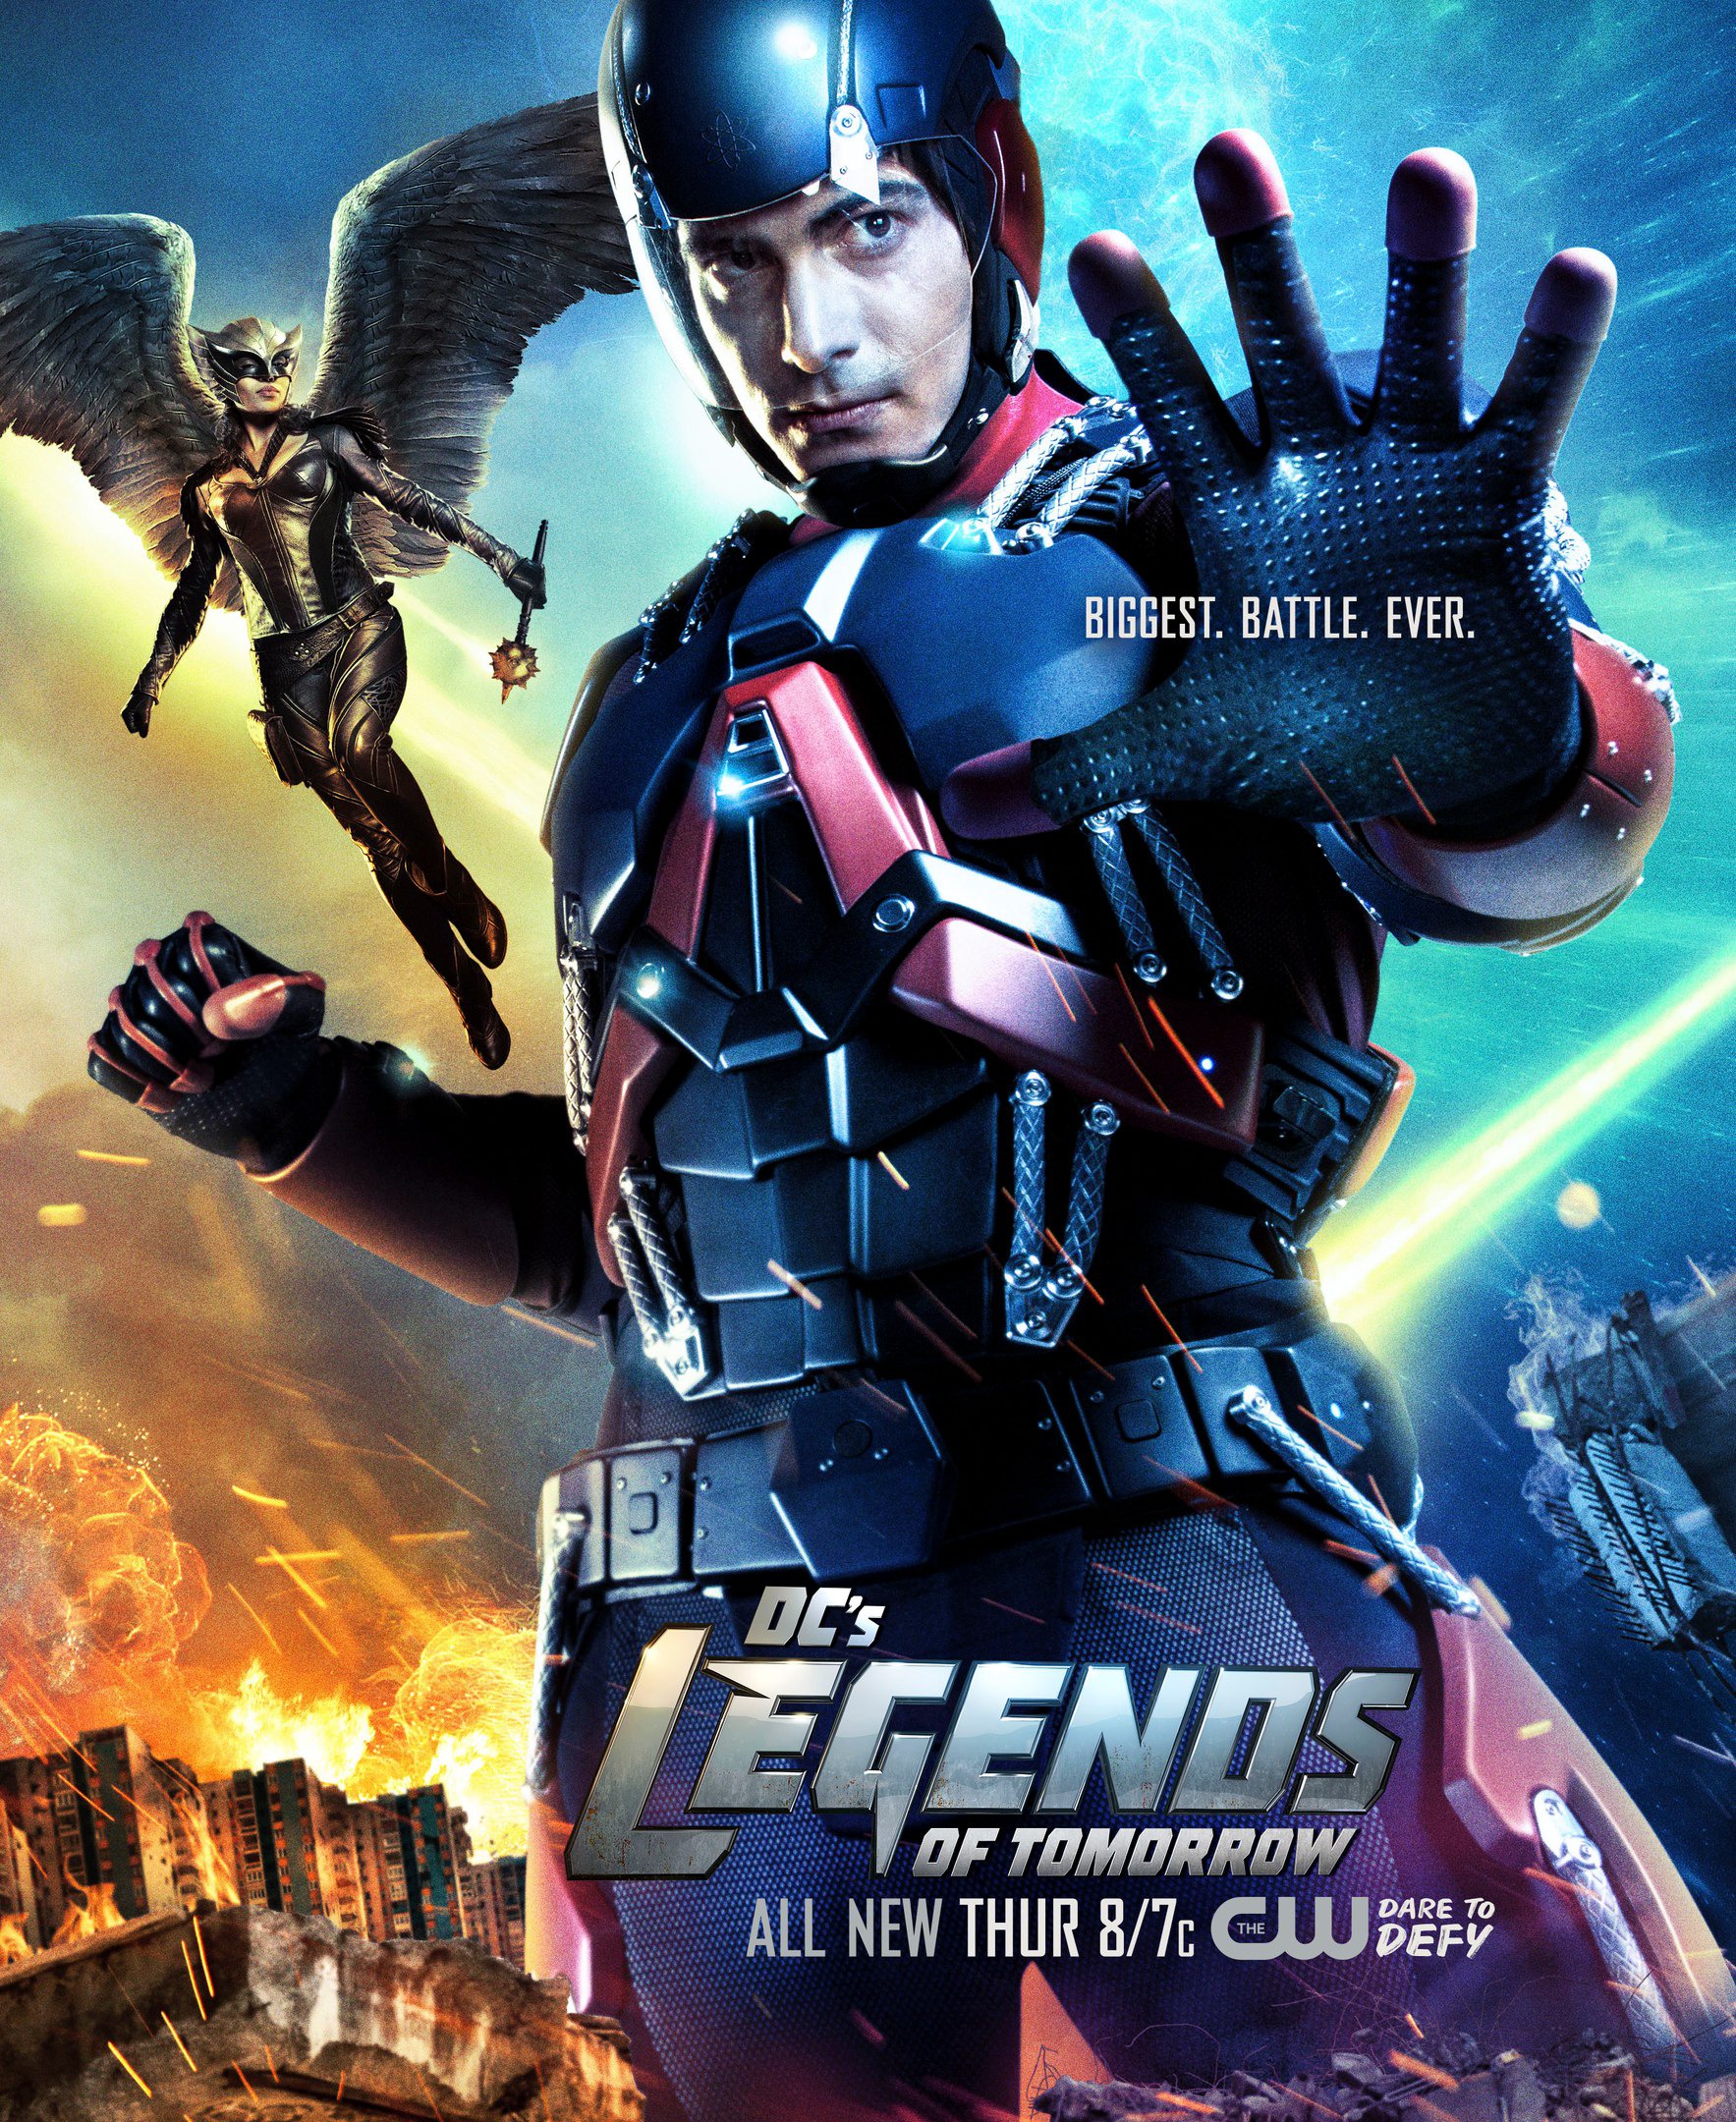 Mega Sized TV Poster Image for Legends of Tomorrow (#14 of 28)